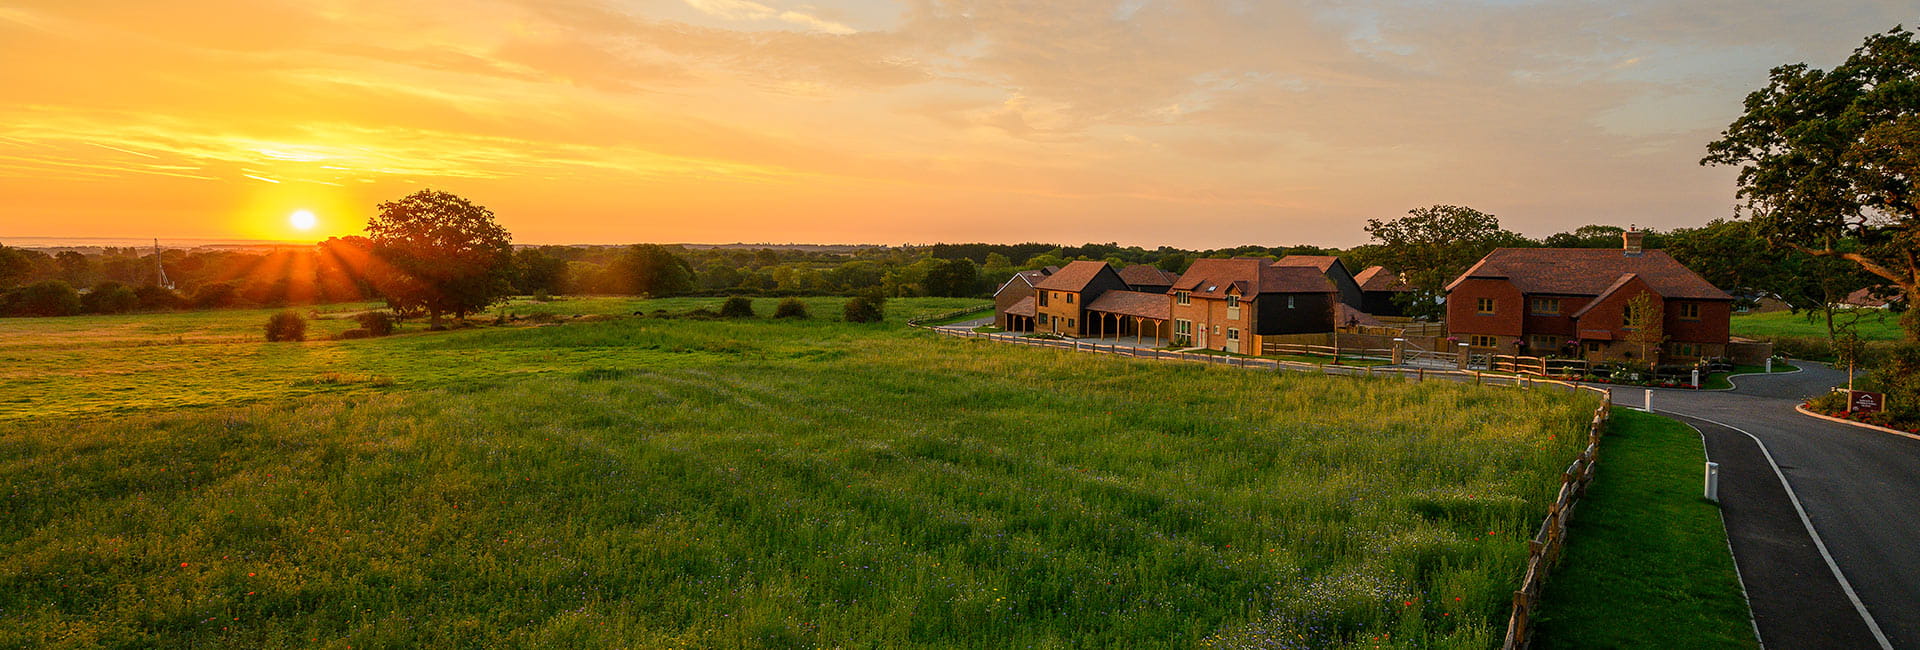 External Image of Farmstead against a beautiful Sunset